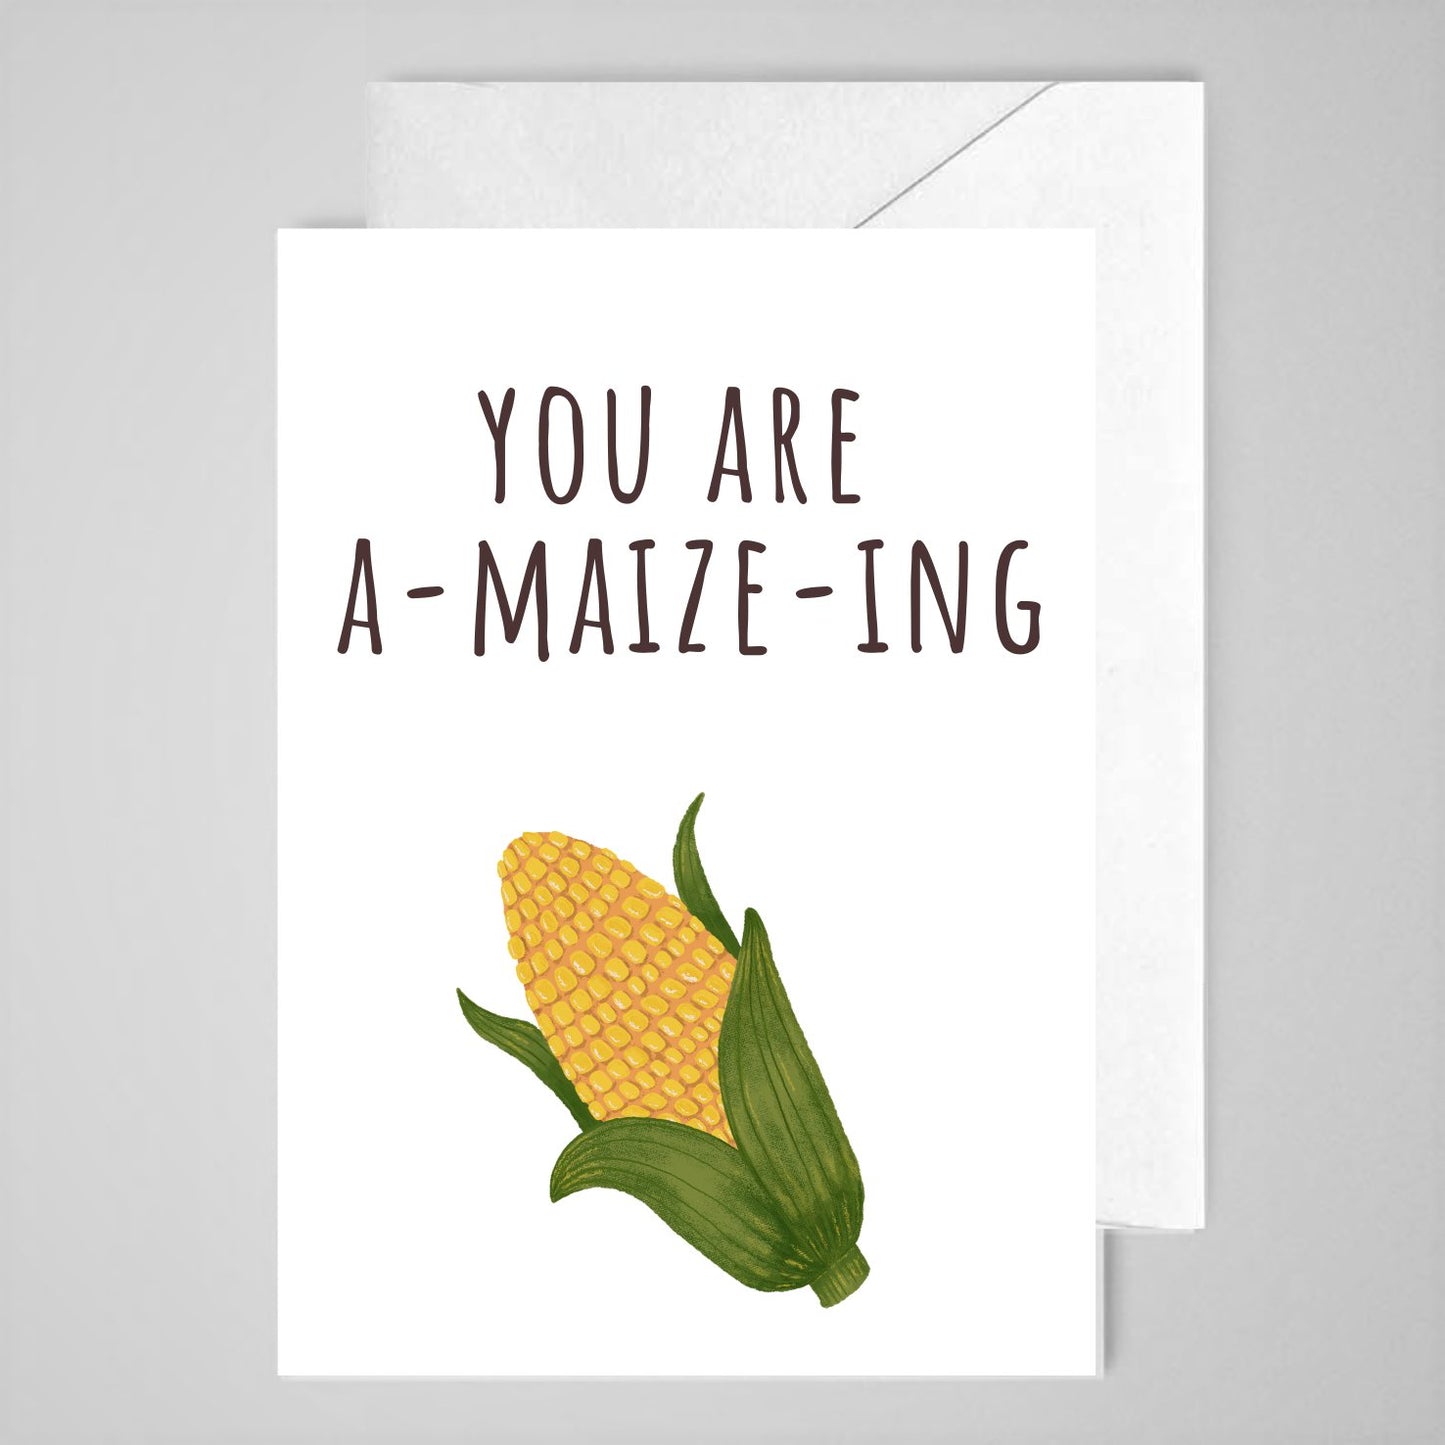 You Are "A-maize-ing" - Greeting Card